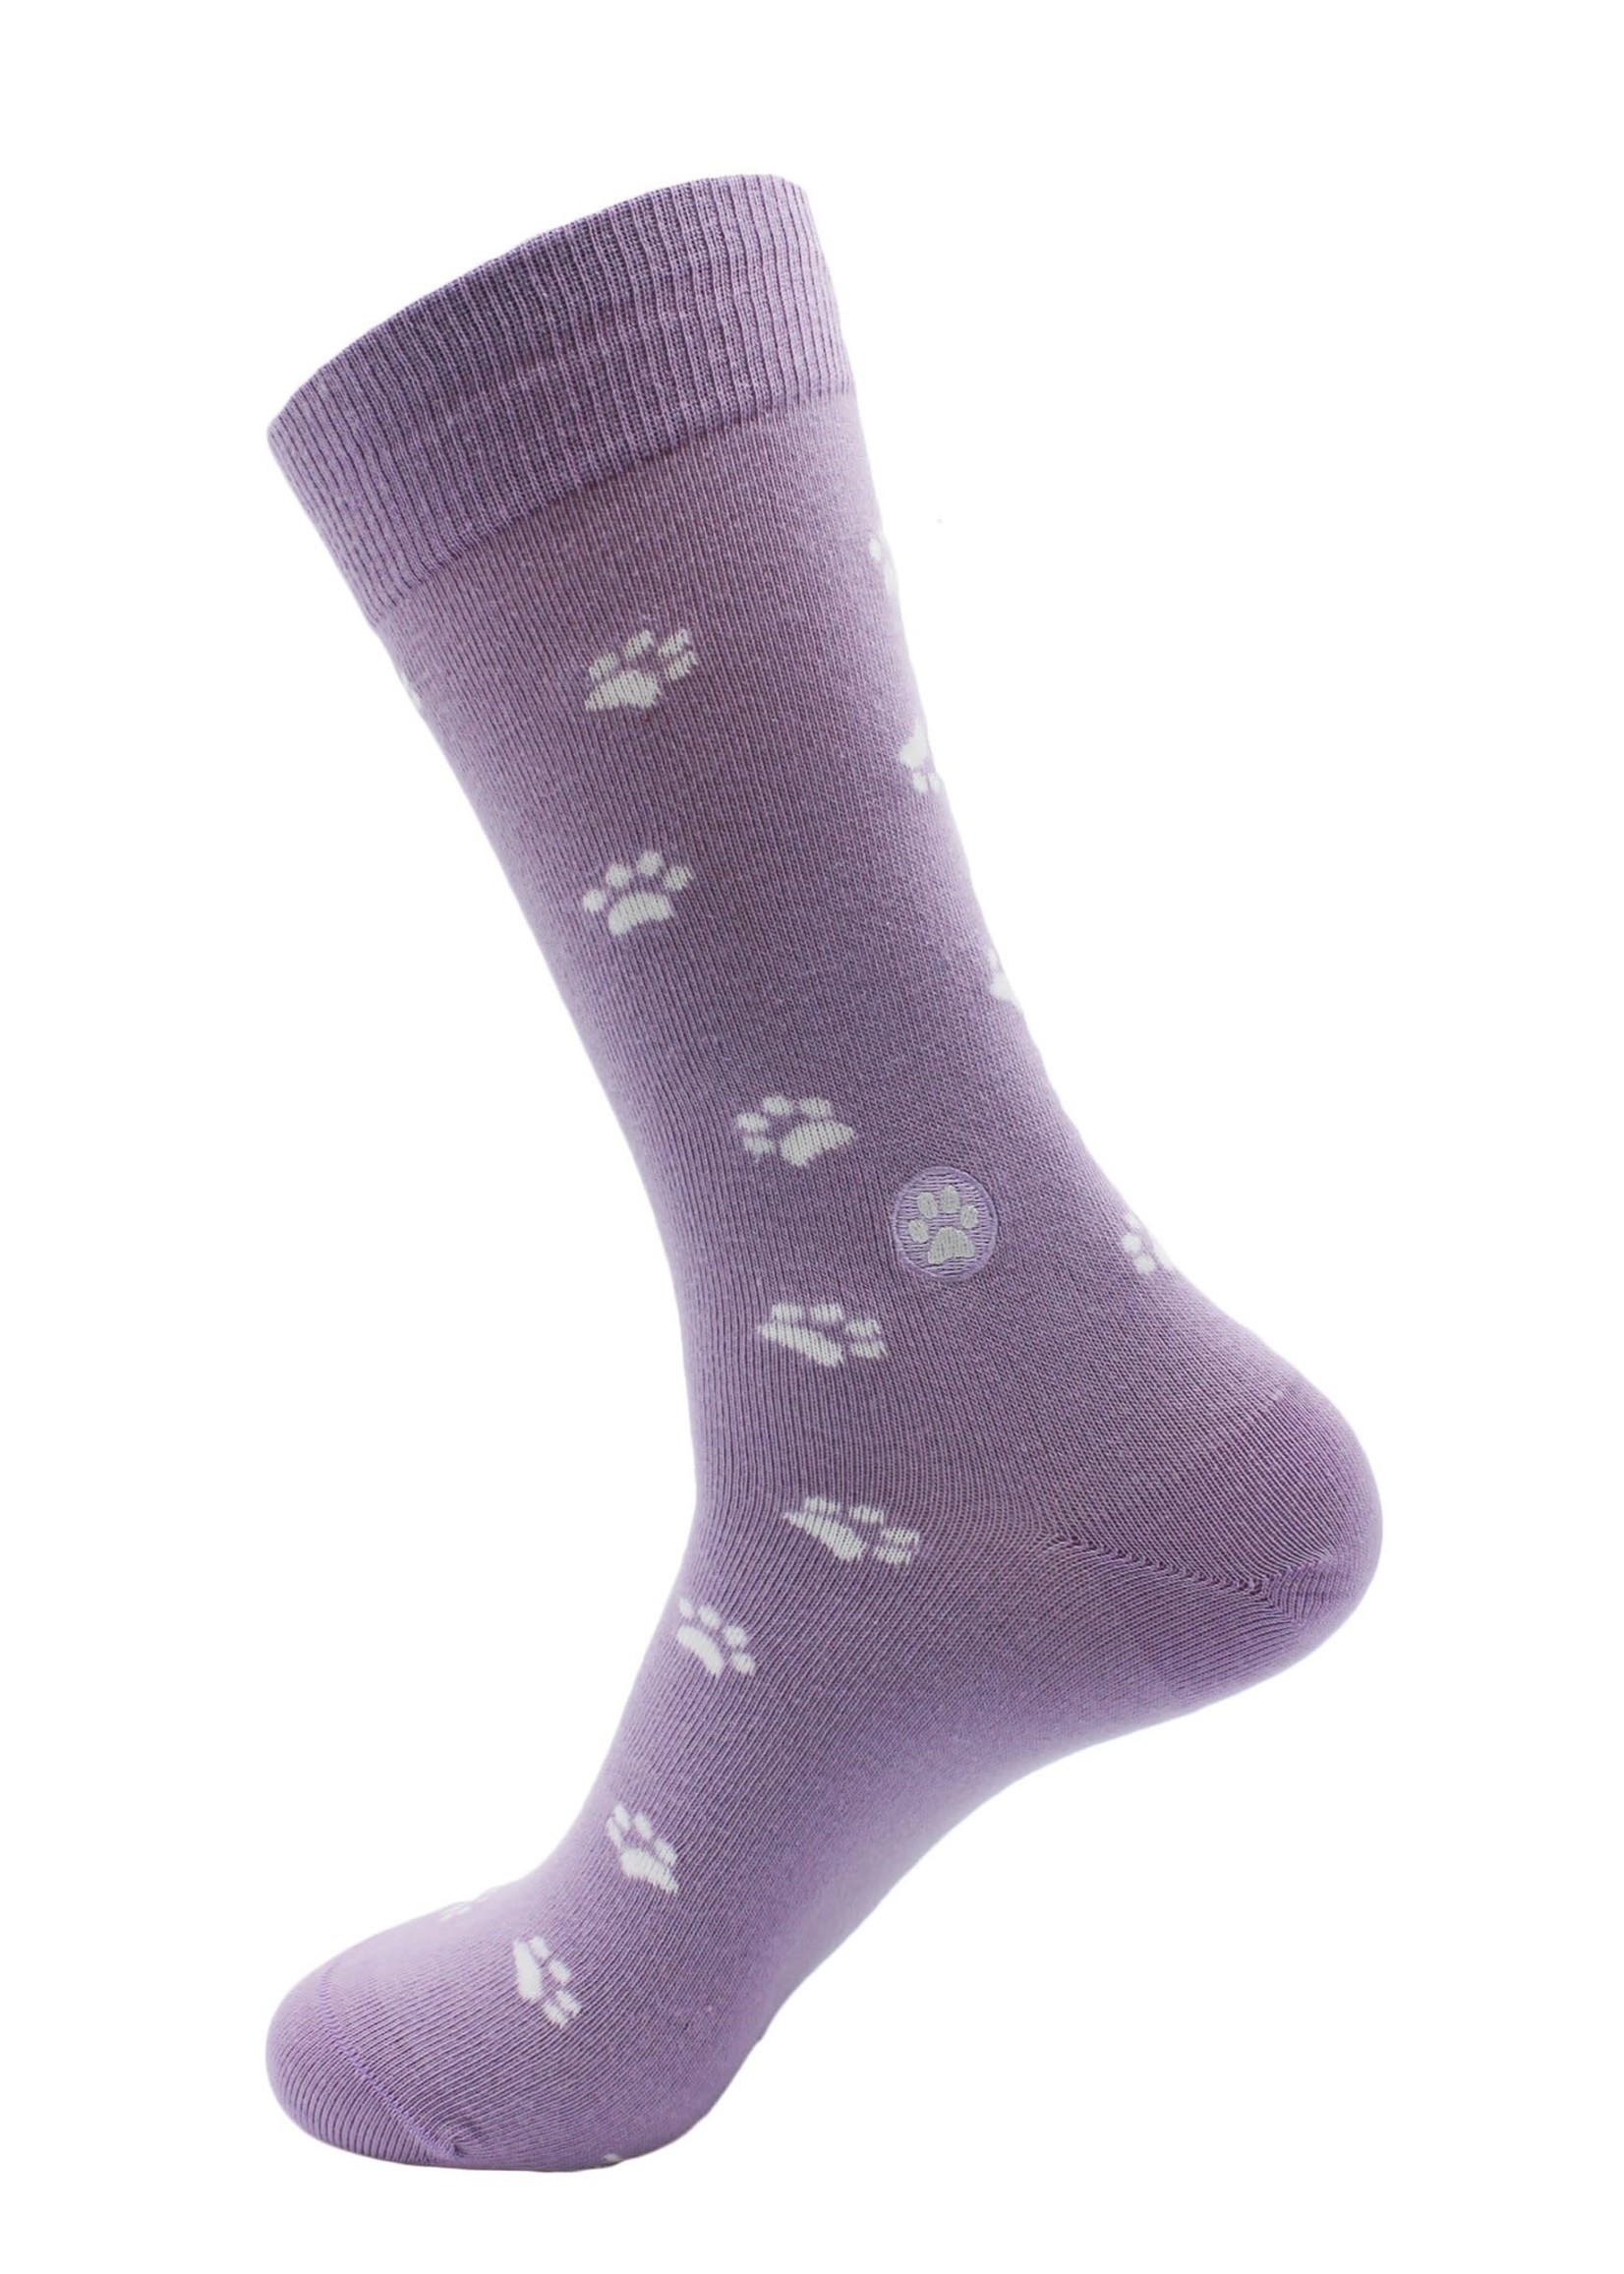 Conscious Step Men's Socks That Save Dogs